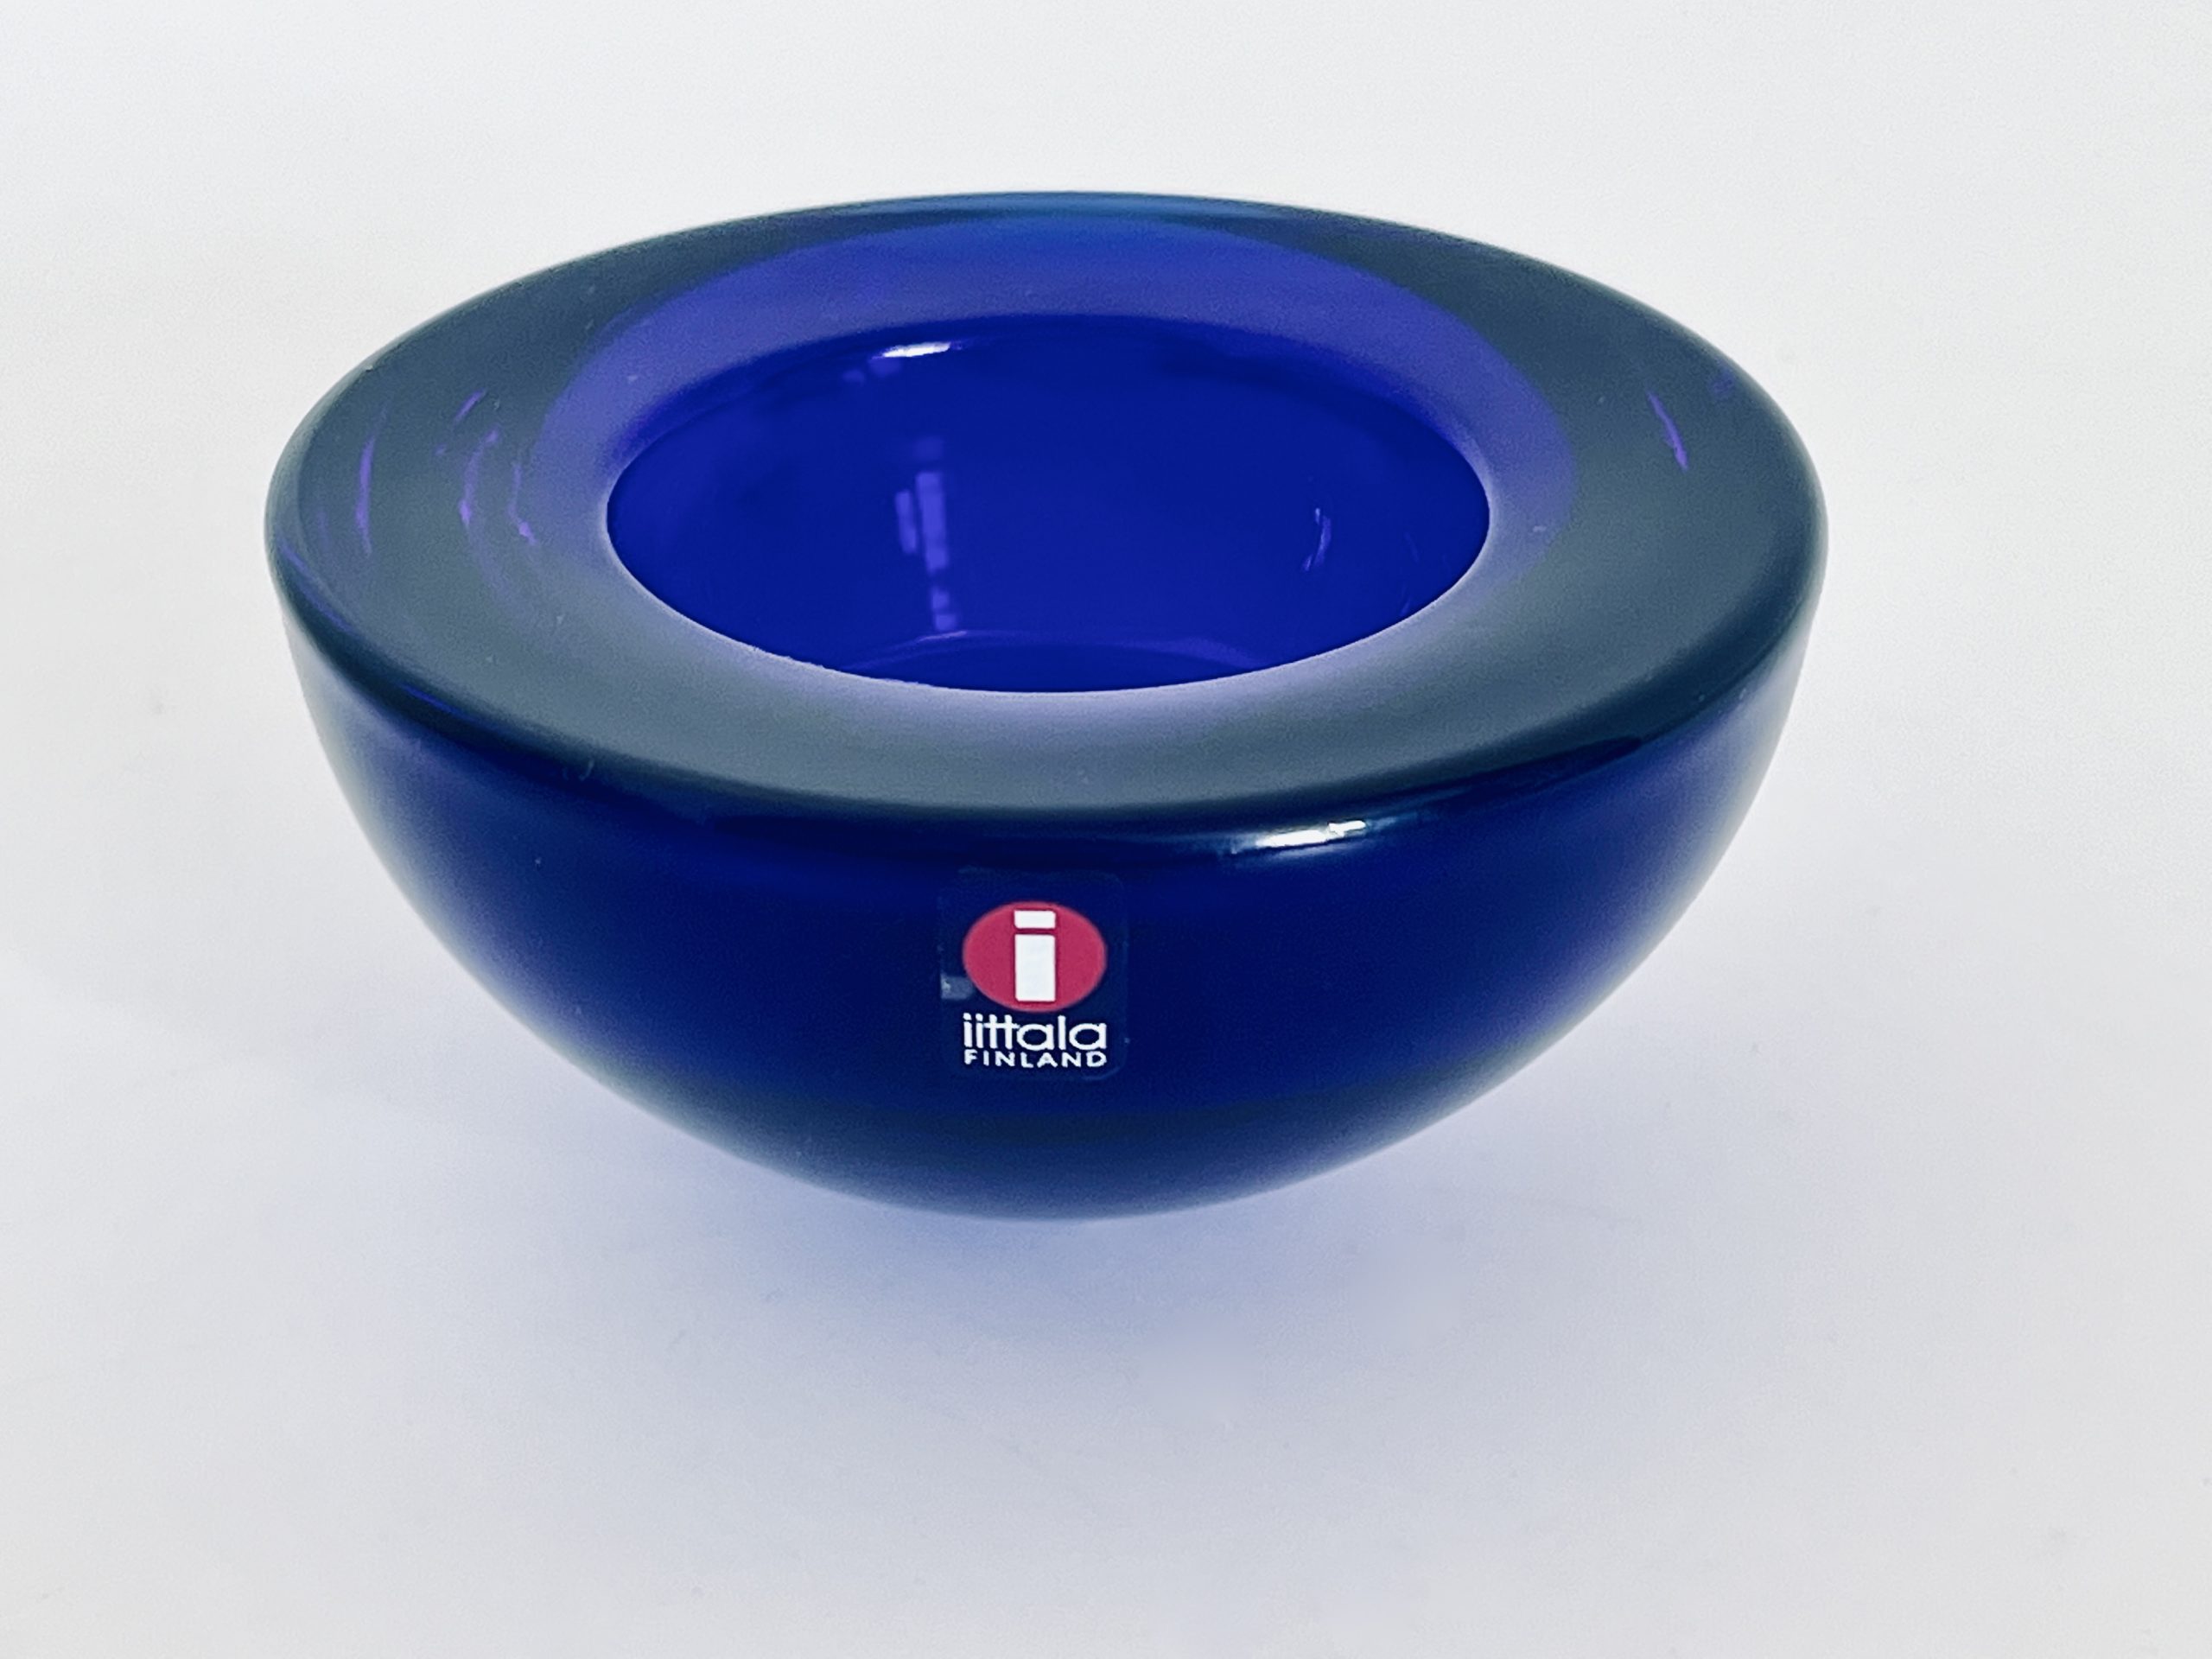 Image of the Iittala Hello Votive Tea Light Holder in the color cobalt blue offered in this advertisement.